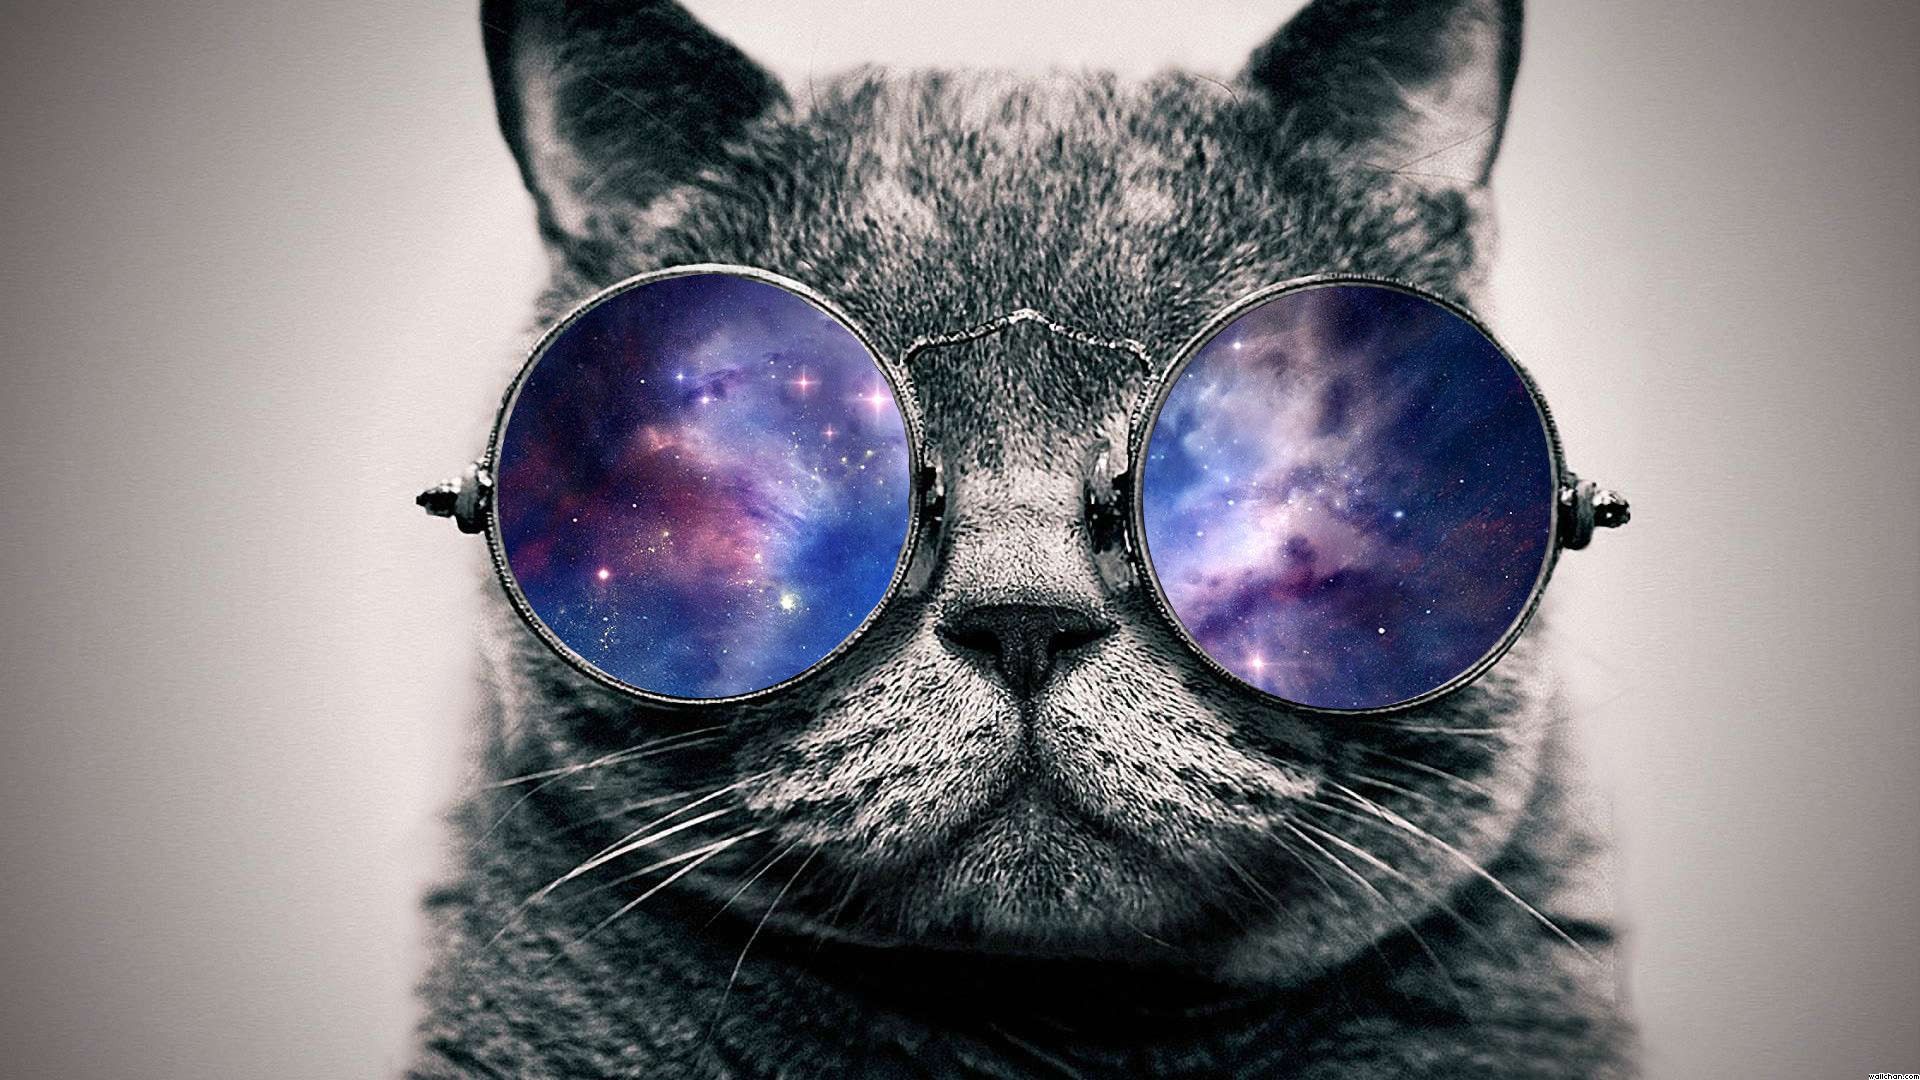 Swag cat wallpapers